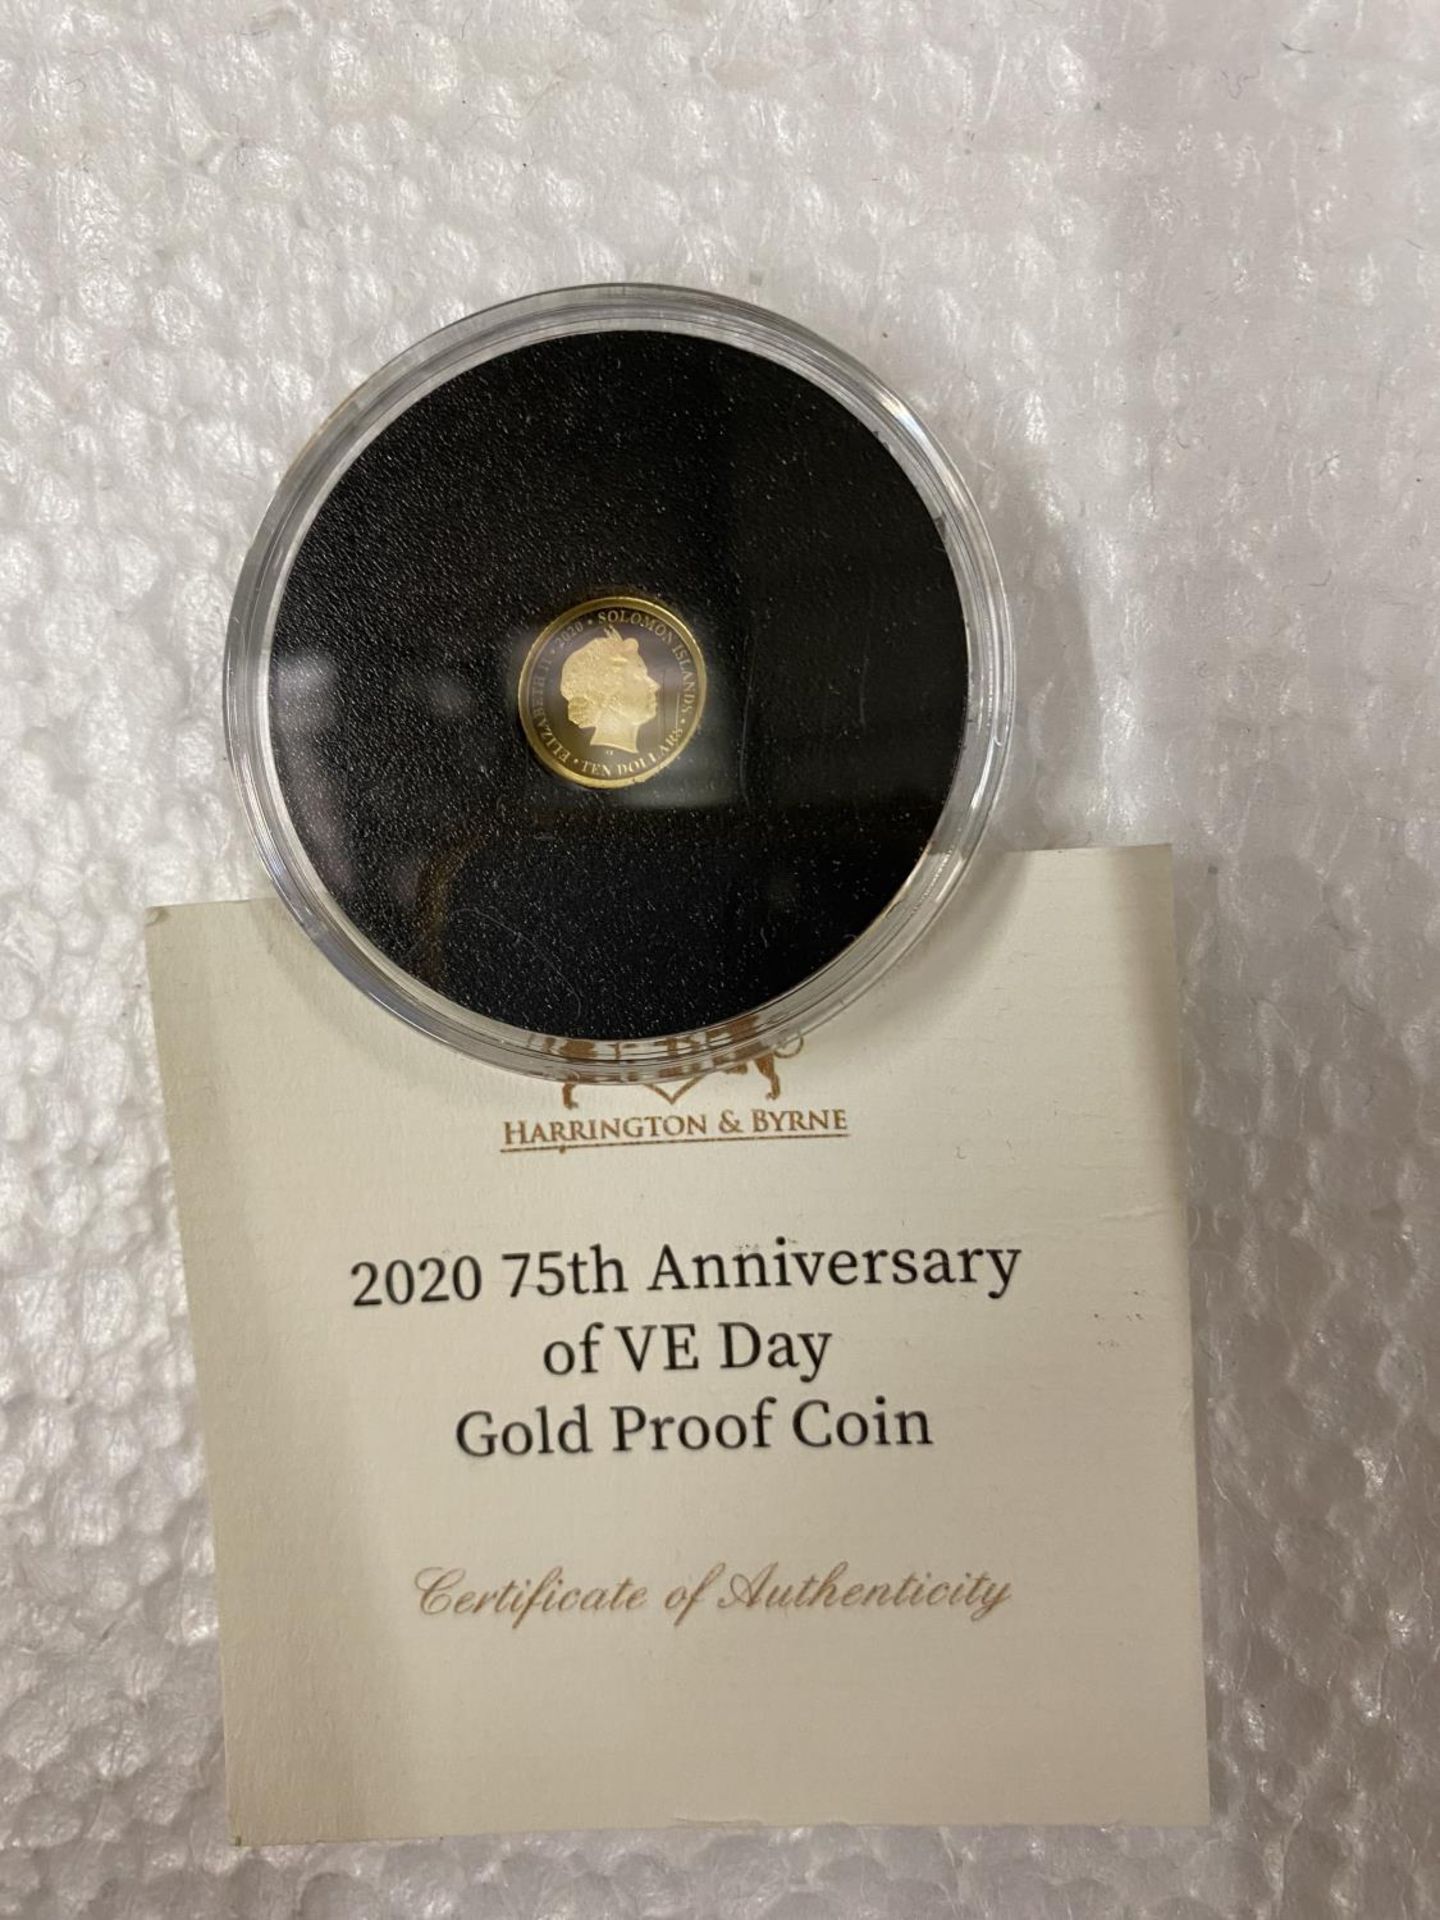 SOLOMON ISLANDS “2020 75TH ANNIVERSARY OF VE DAY” 24 CARAT GOLD PROOF COIN WITH COA . THE COIN - Image 2 of 3